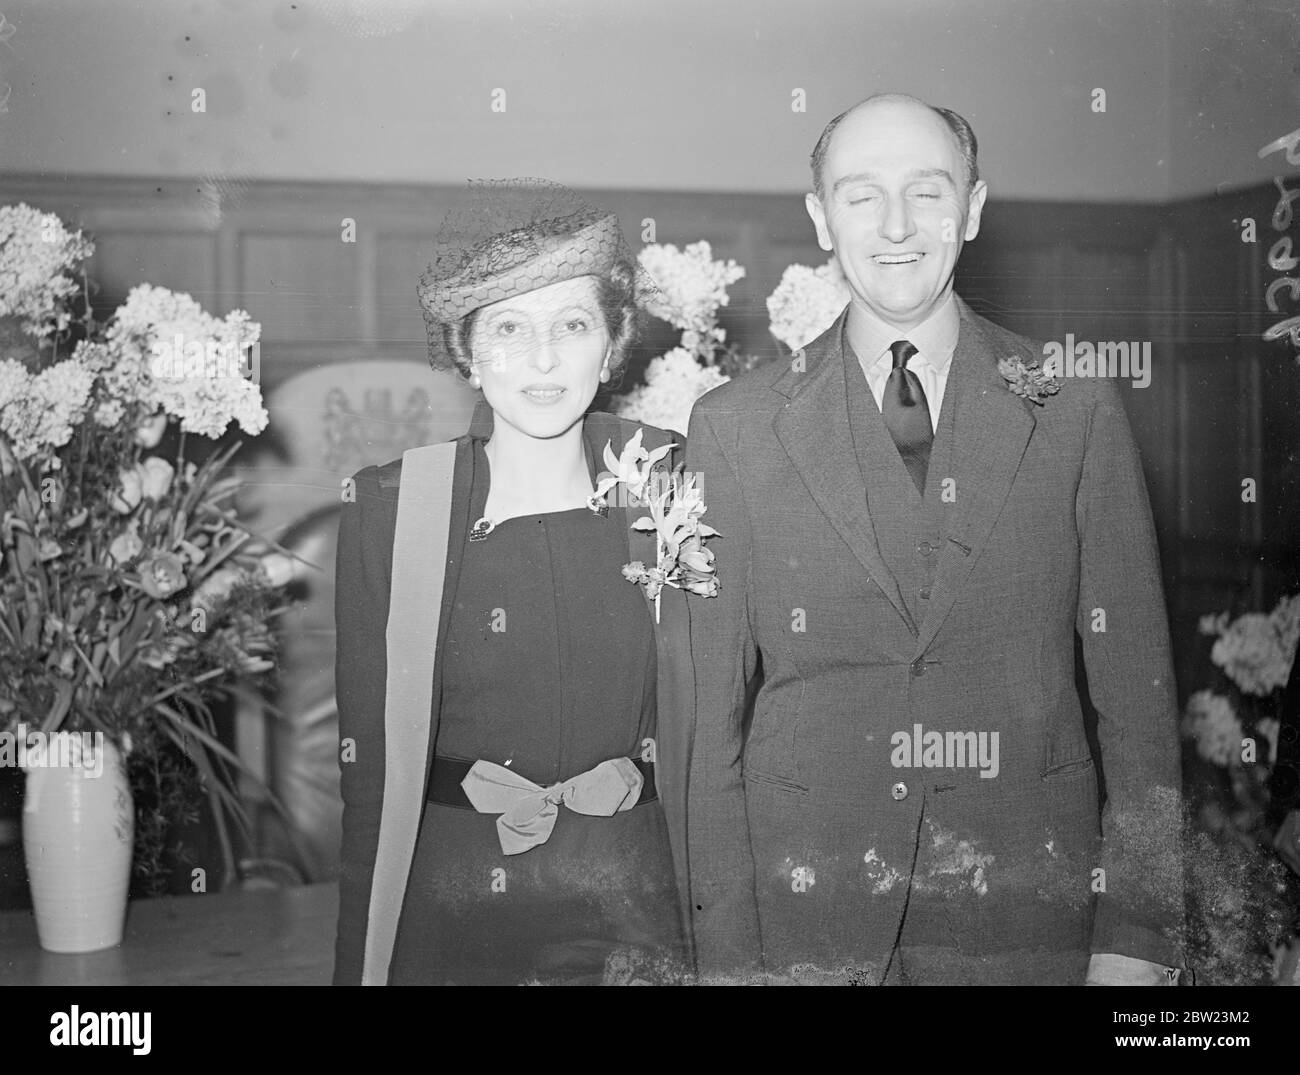 Alter their engagement had been kept secret until a short time before the ceremony, Mr Vyvyan Drury and Mrs Nina Soames, were married at Caxton Hall register office, Westminster, London. Seen here, leaving after the ceremony. 16 February 1938 Stock Photo